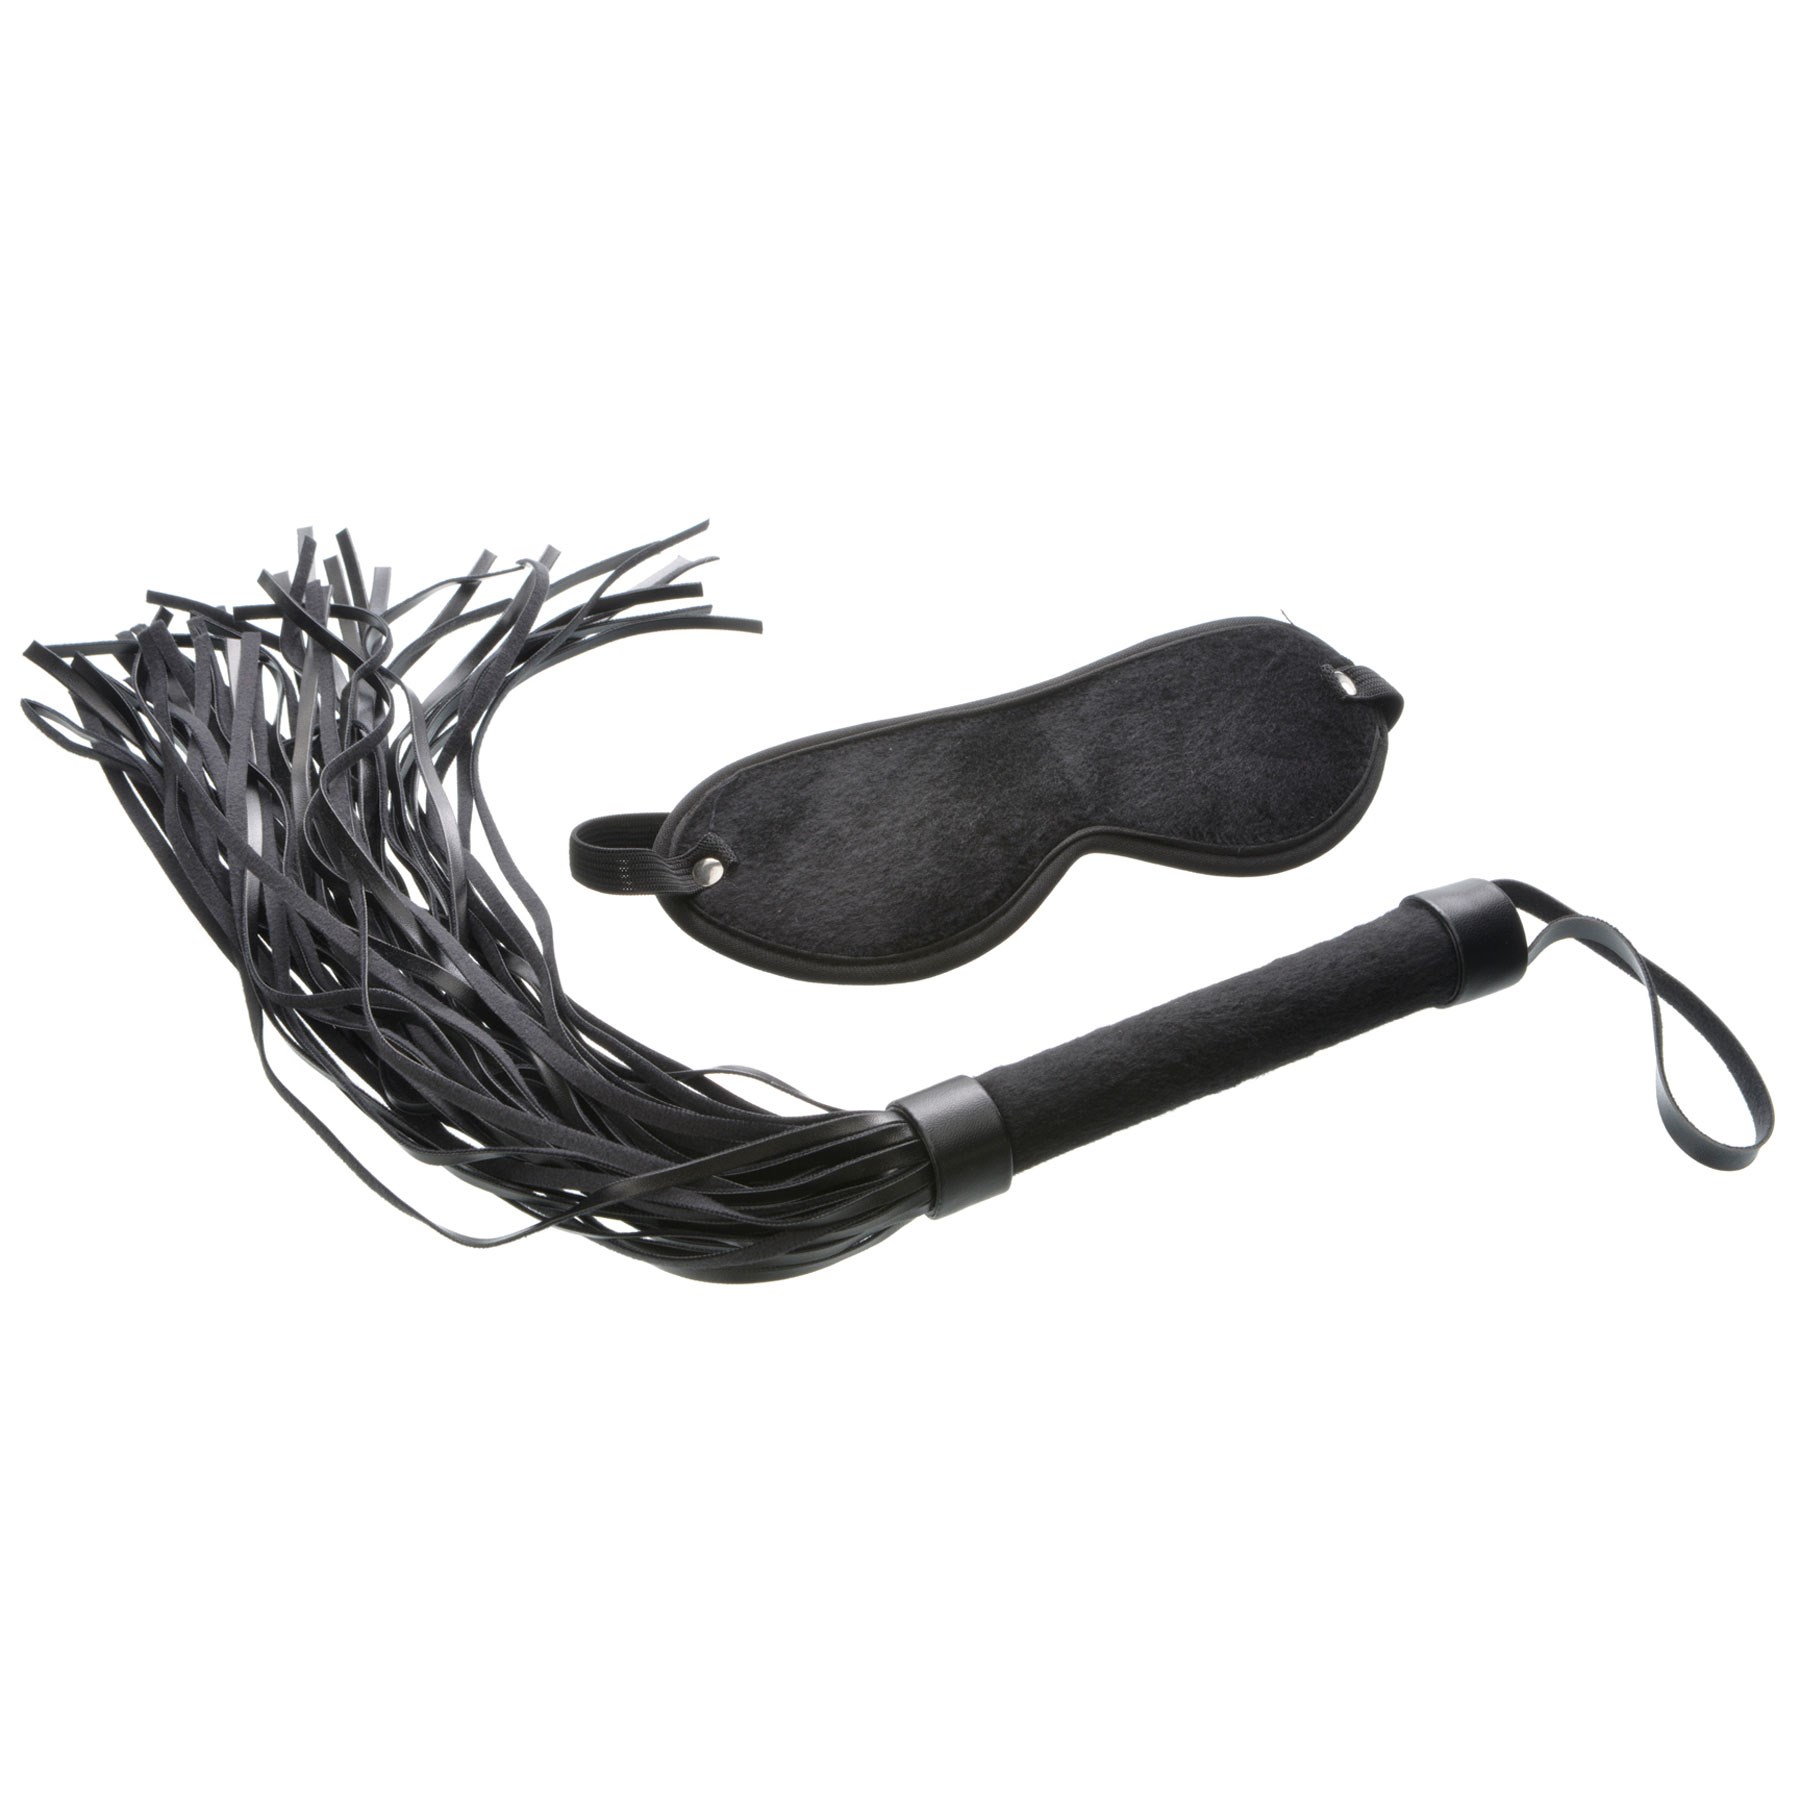 Weekend In Bed Lovers Bondage Kit blindfold and flogger